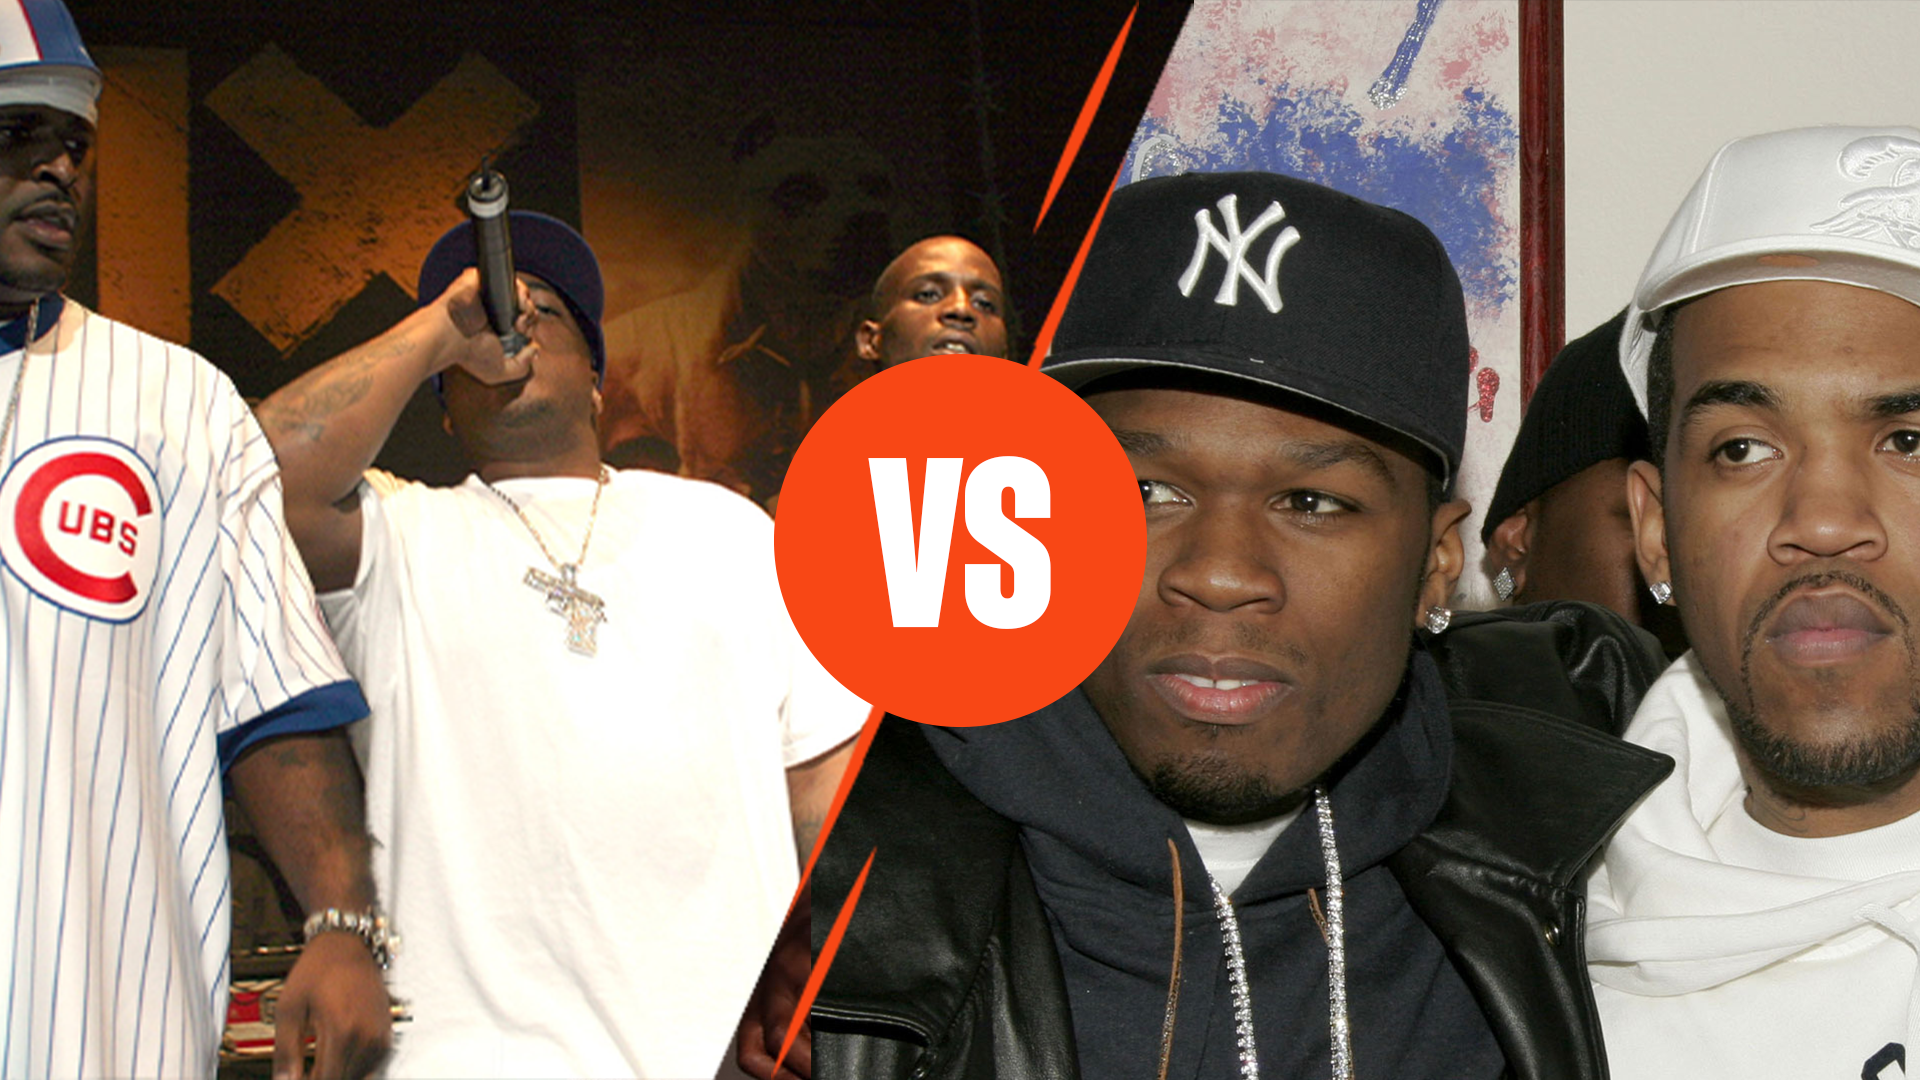 Ruff Ryders vs G-Unit, Greatest Rap Crew of All Time